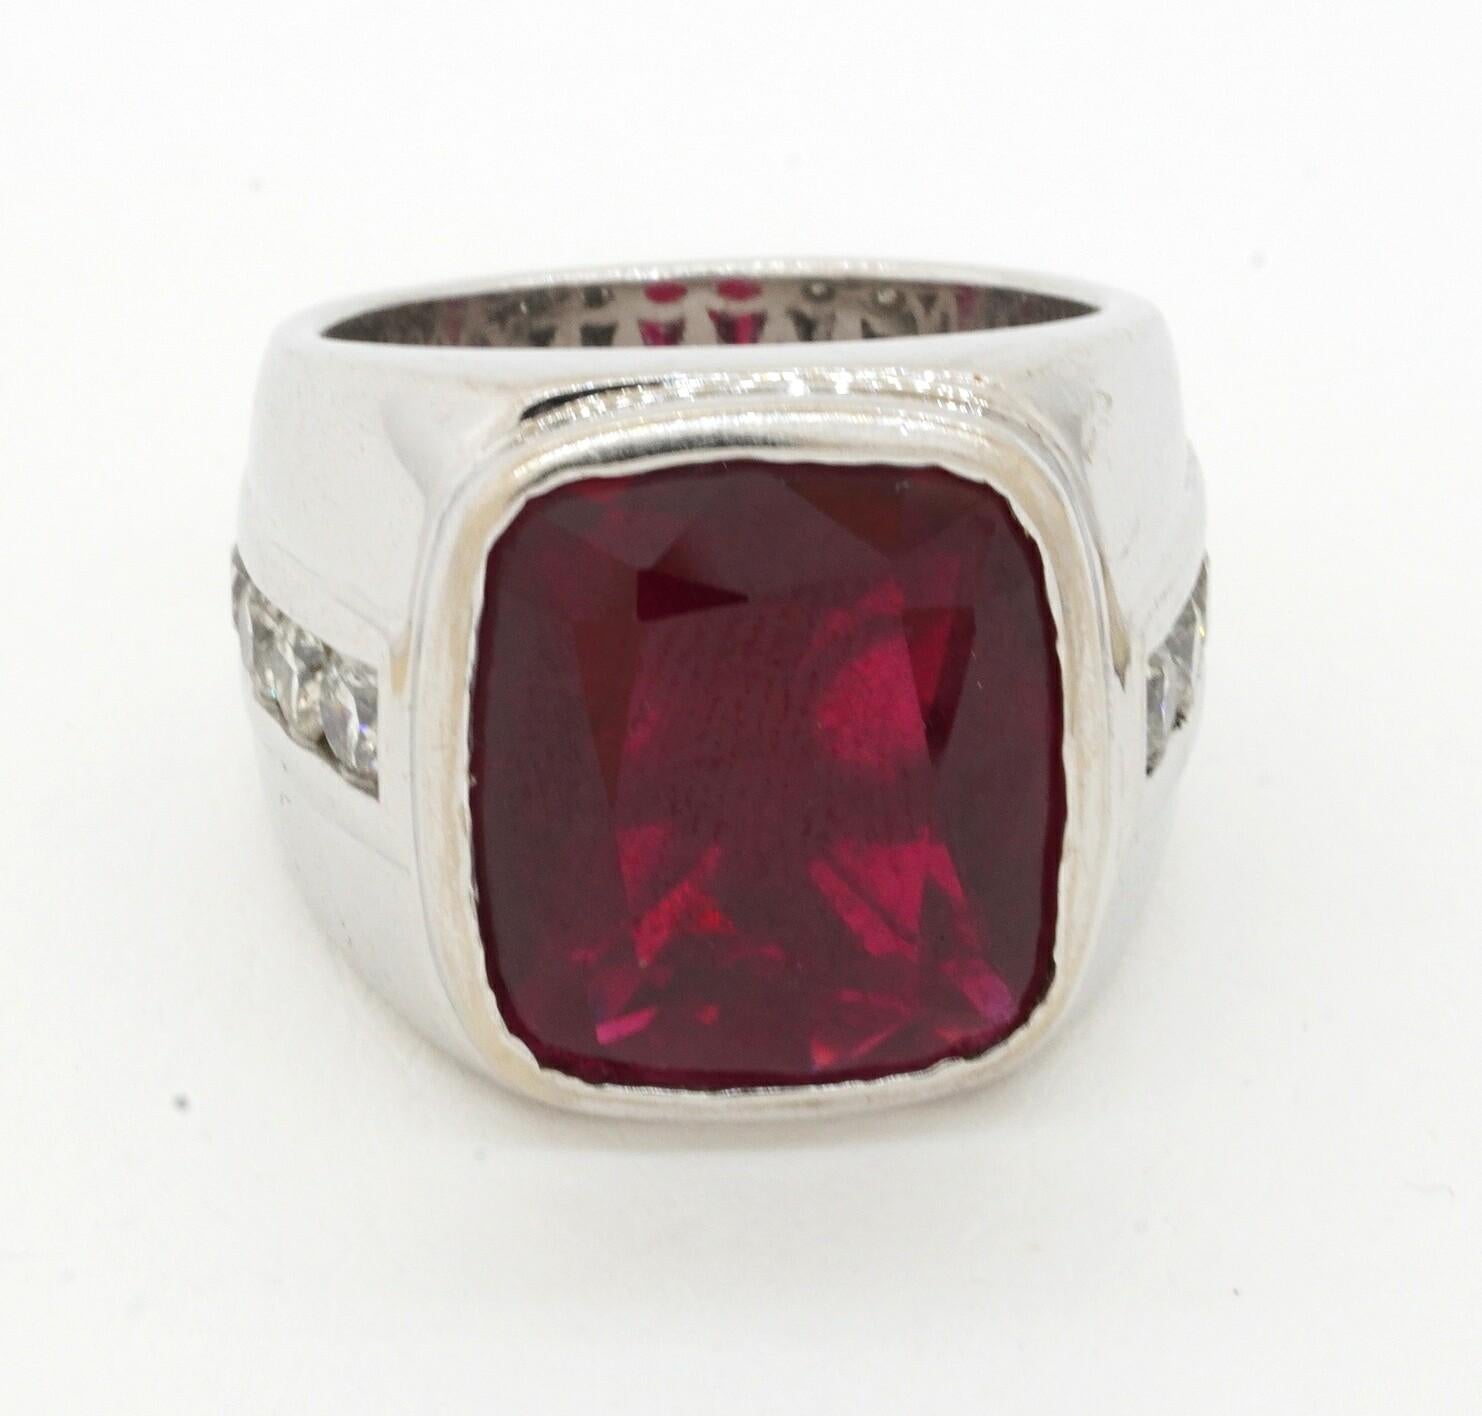 Heavy 14K WG 13.20CT VS diamond & synthetic ruby men's ring size 7.75. This intriguing piece of jewelry is crafted in gorgeous 14K white gold and features a synthetic approx. 12.0CT (14 x 12mm) ruby center, as well as, 8 diamonds (Excellent VS2 -